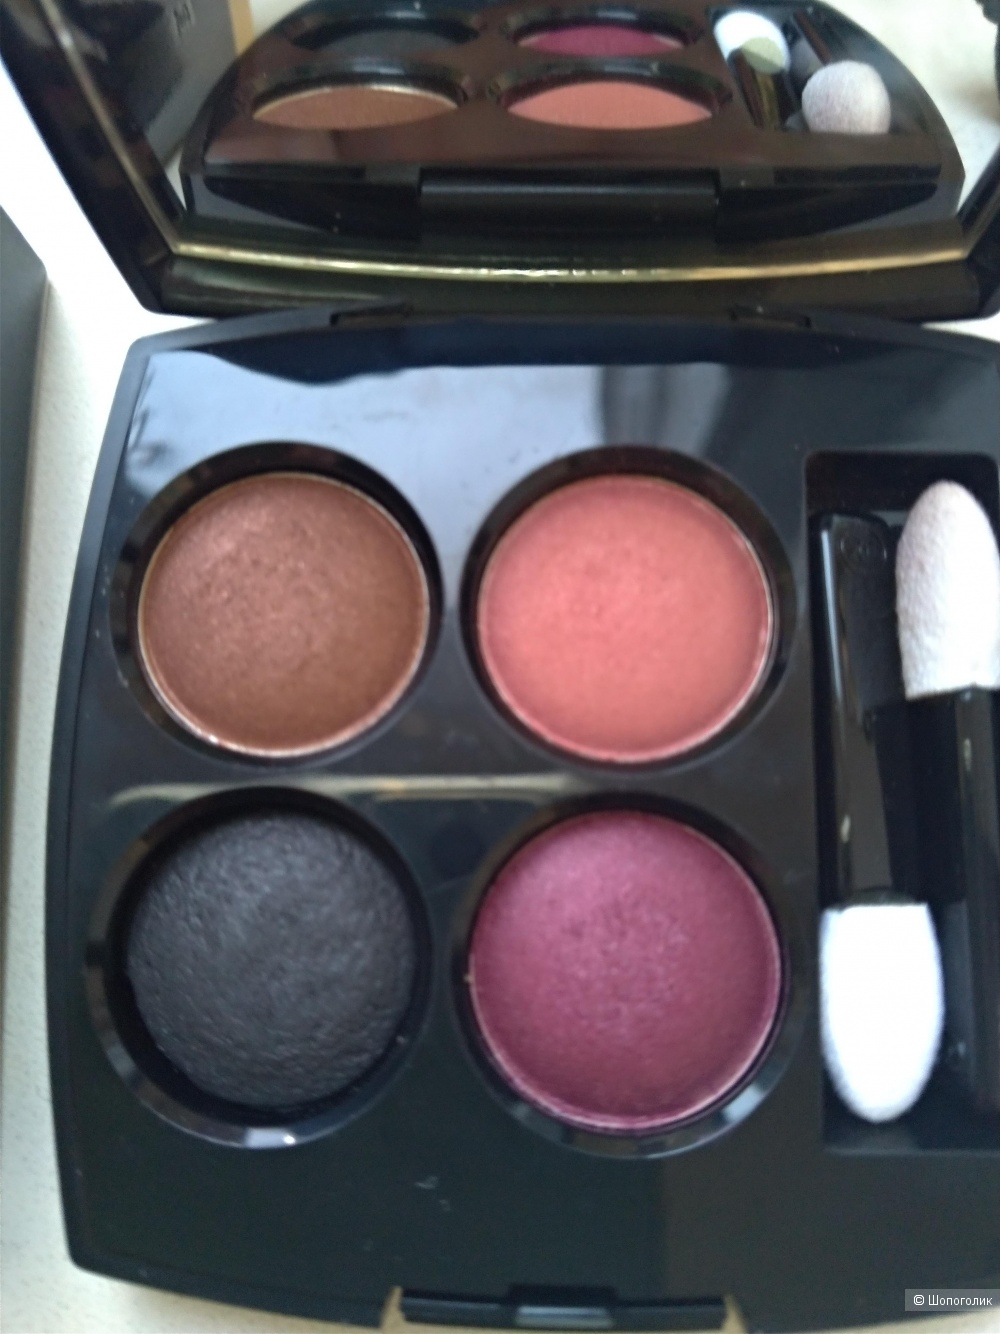 Chanel Les 4 ombres 304 Mystery et intensite.